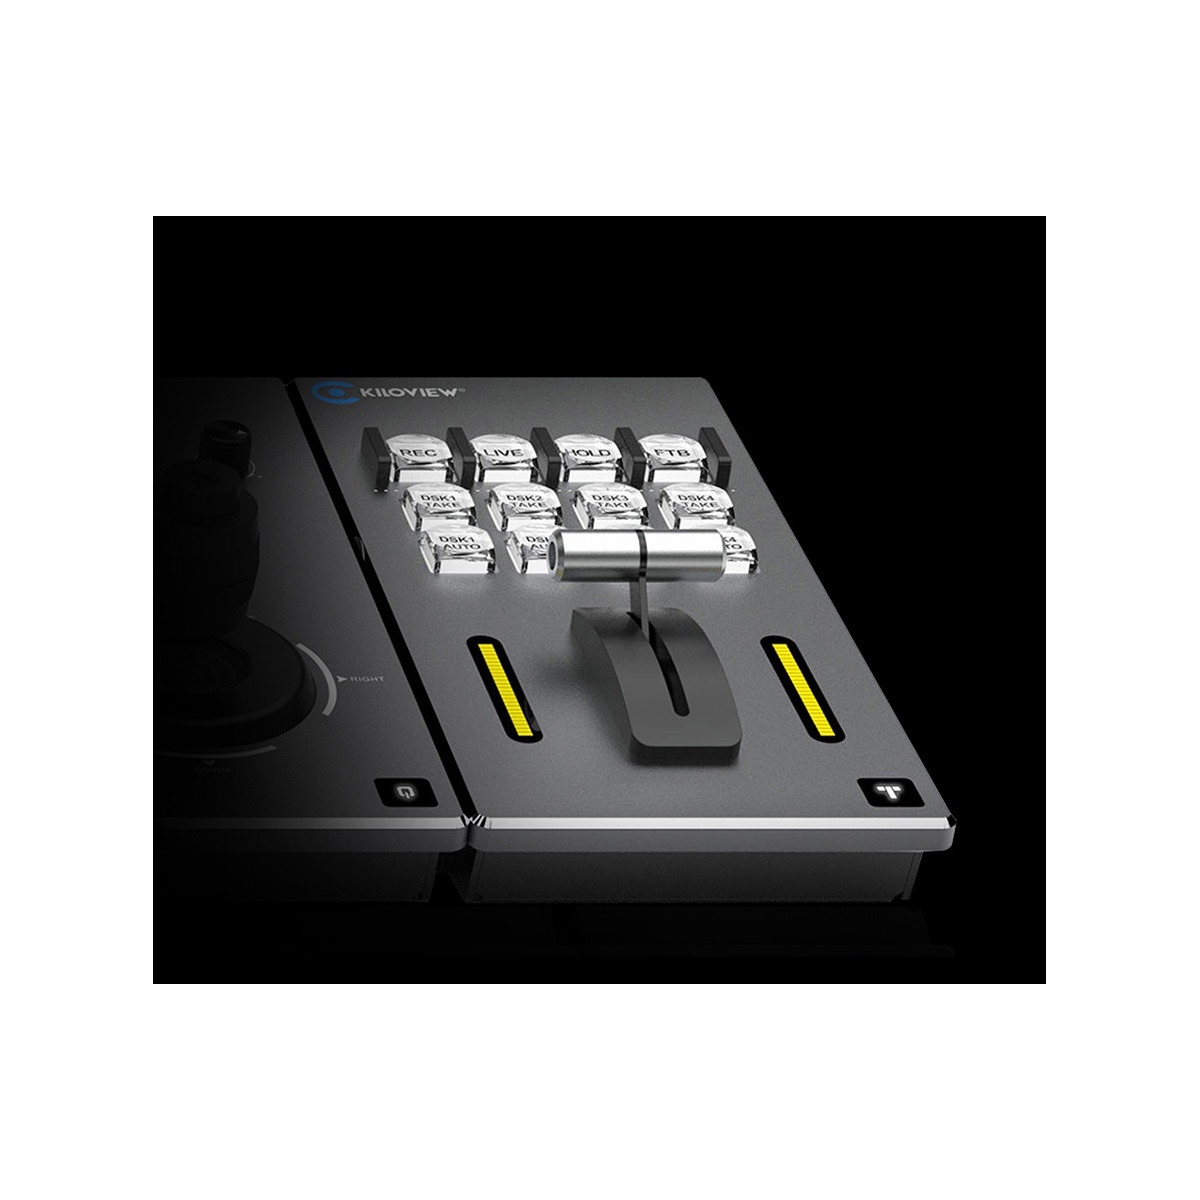 Kiloview Zoom Deck - Easy toggling with a "T" stick, 12 buttons for your selection